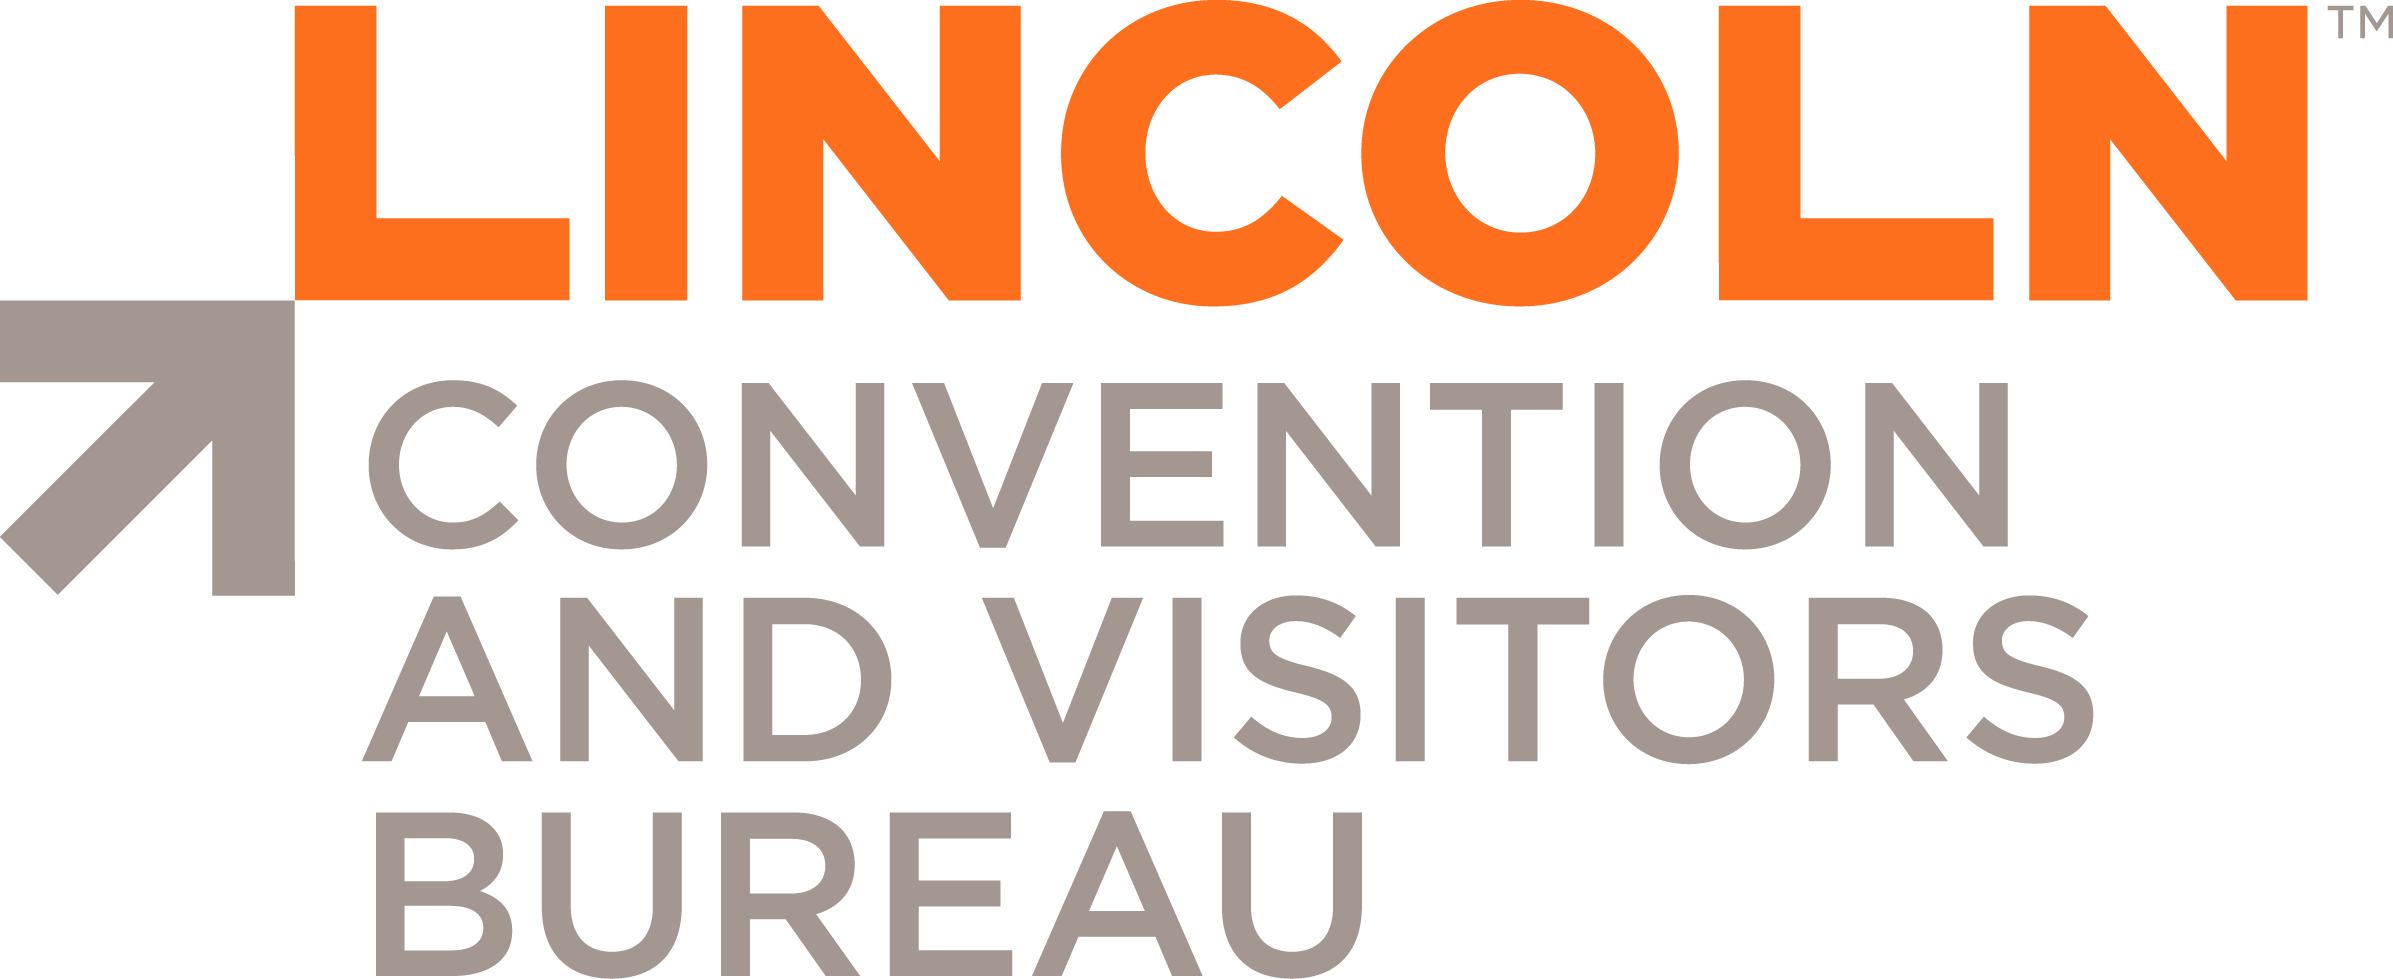 Lincoln Convention and Visitors Bureau logo